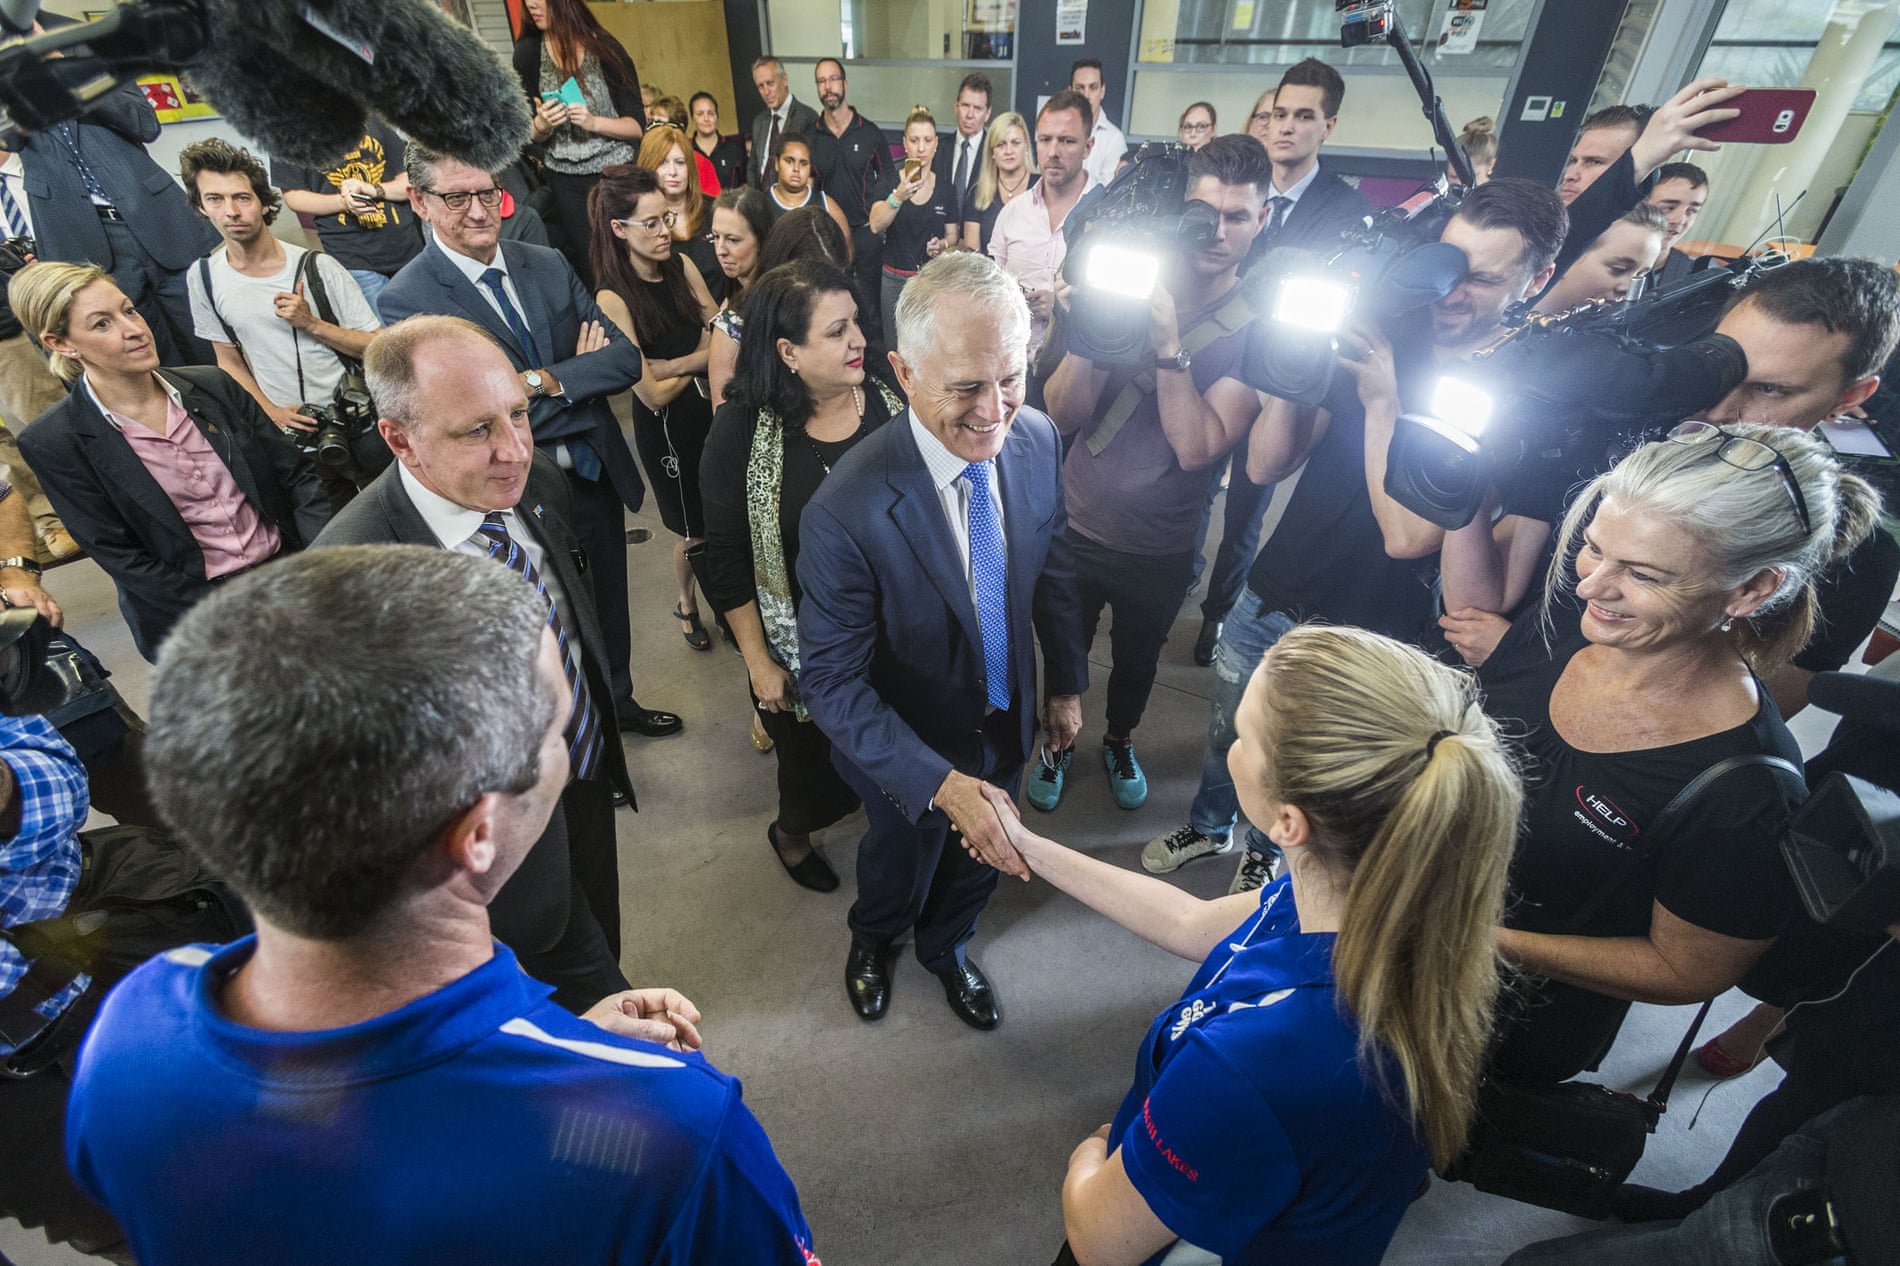 Malcolm Turnbull visits a YMCA youth centre in Brisbane on the first full day of campaigning.